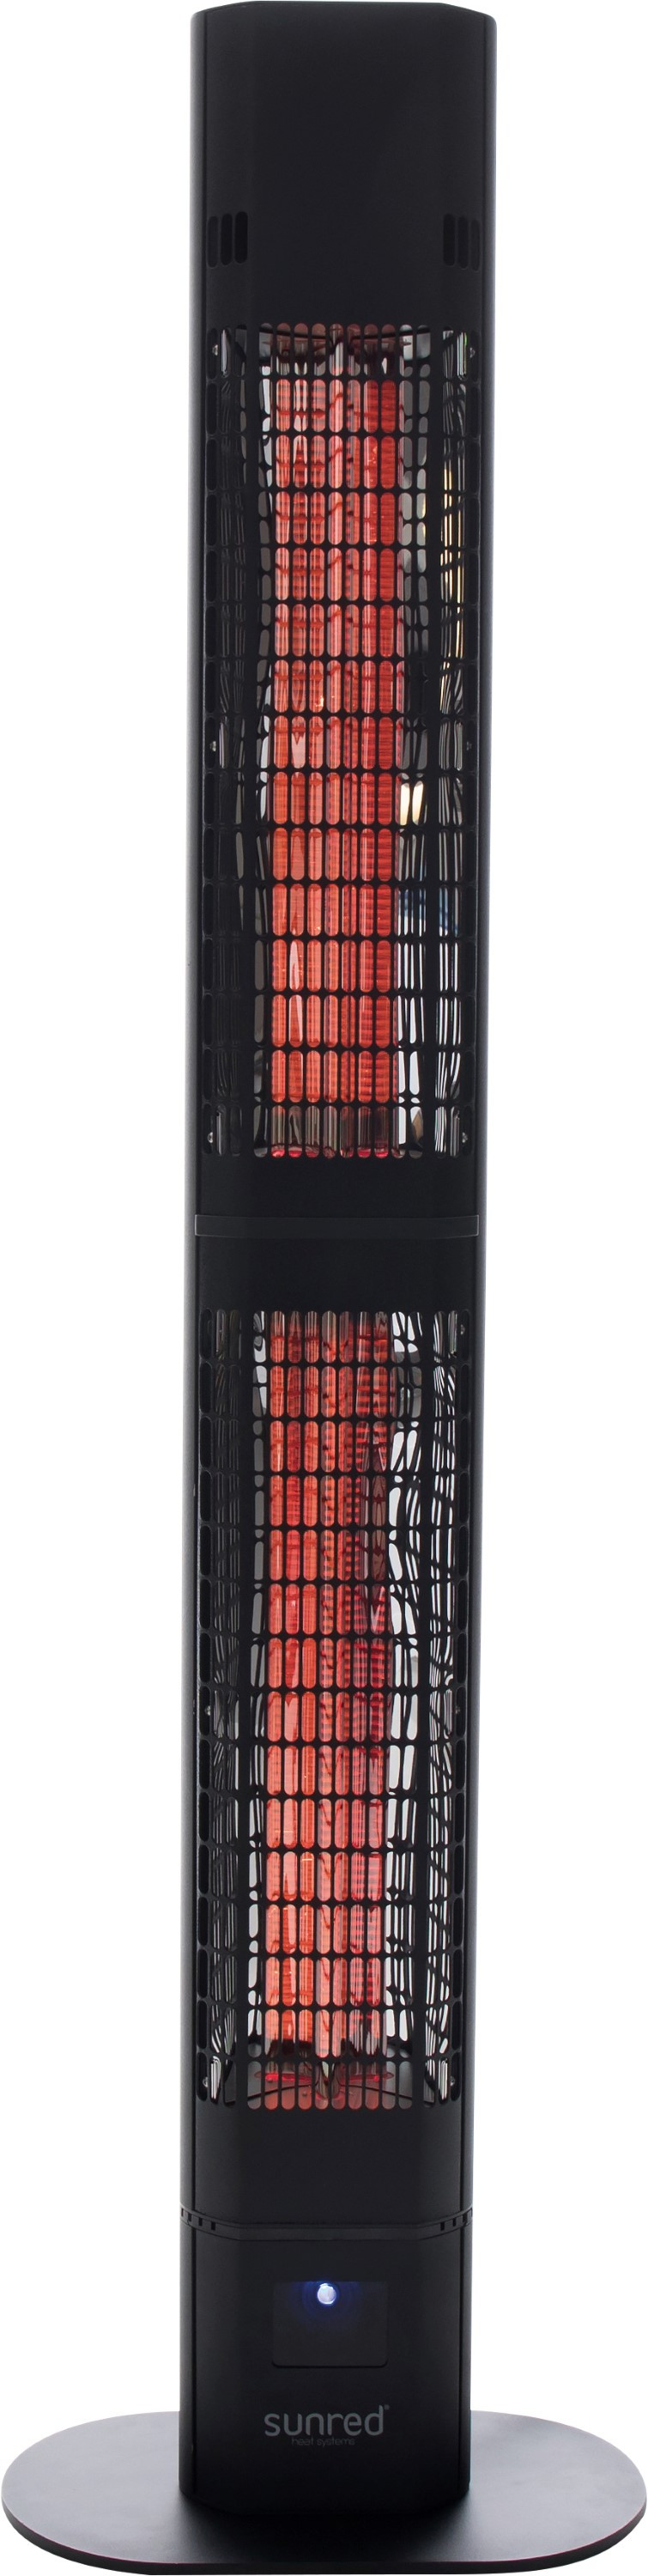 SUNRED | Heater | RD-DARK-3000L, Valencia Dark Lounge | Infrared | 3000 W | Number of power levels | Suitable for rooms up to  m² | Black | IP55